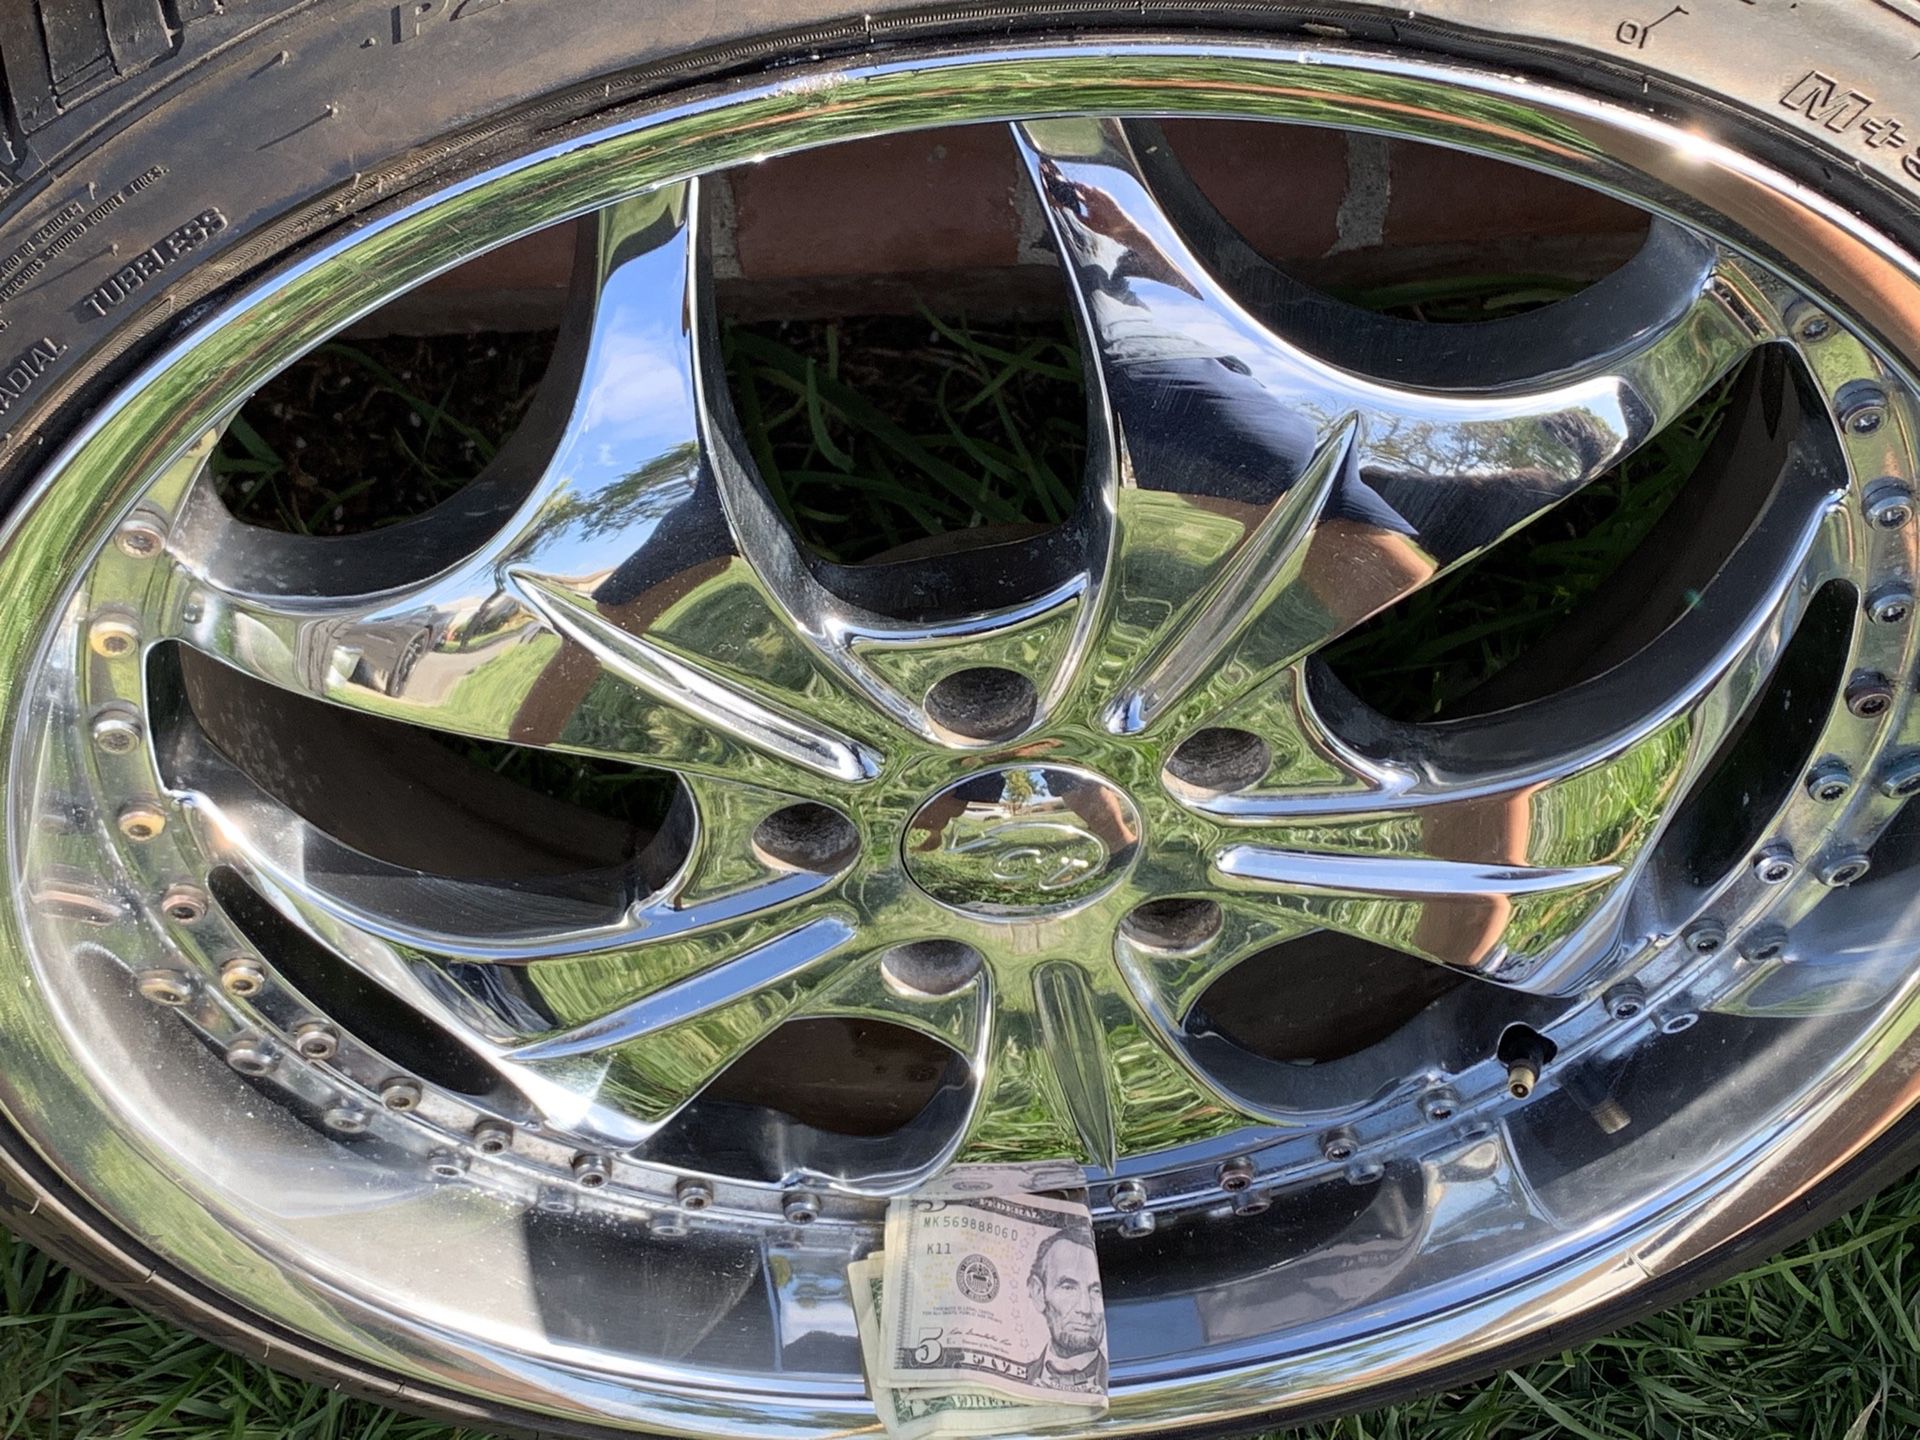 20” VCT 5/114.3 lug pattern rims and tites